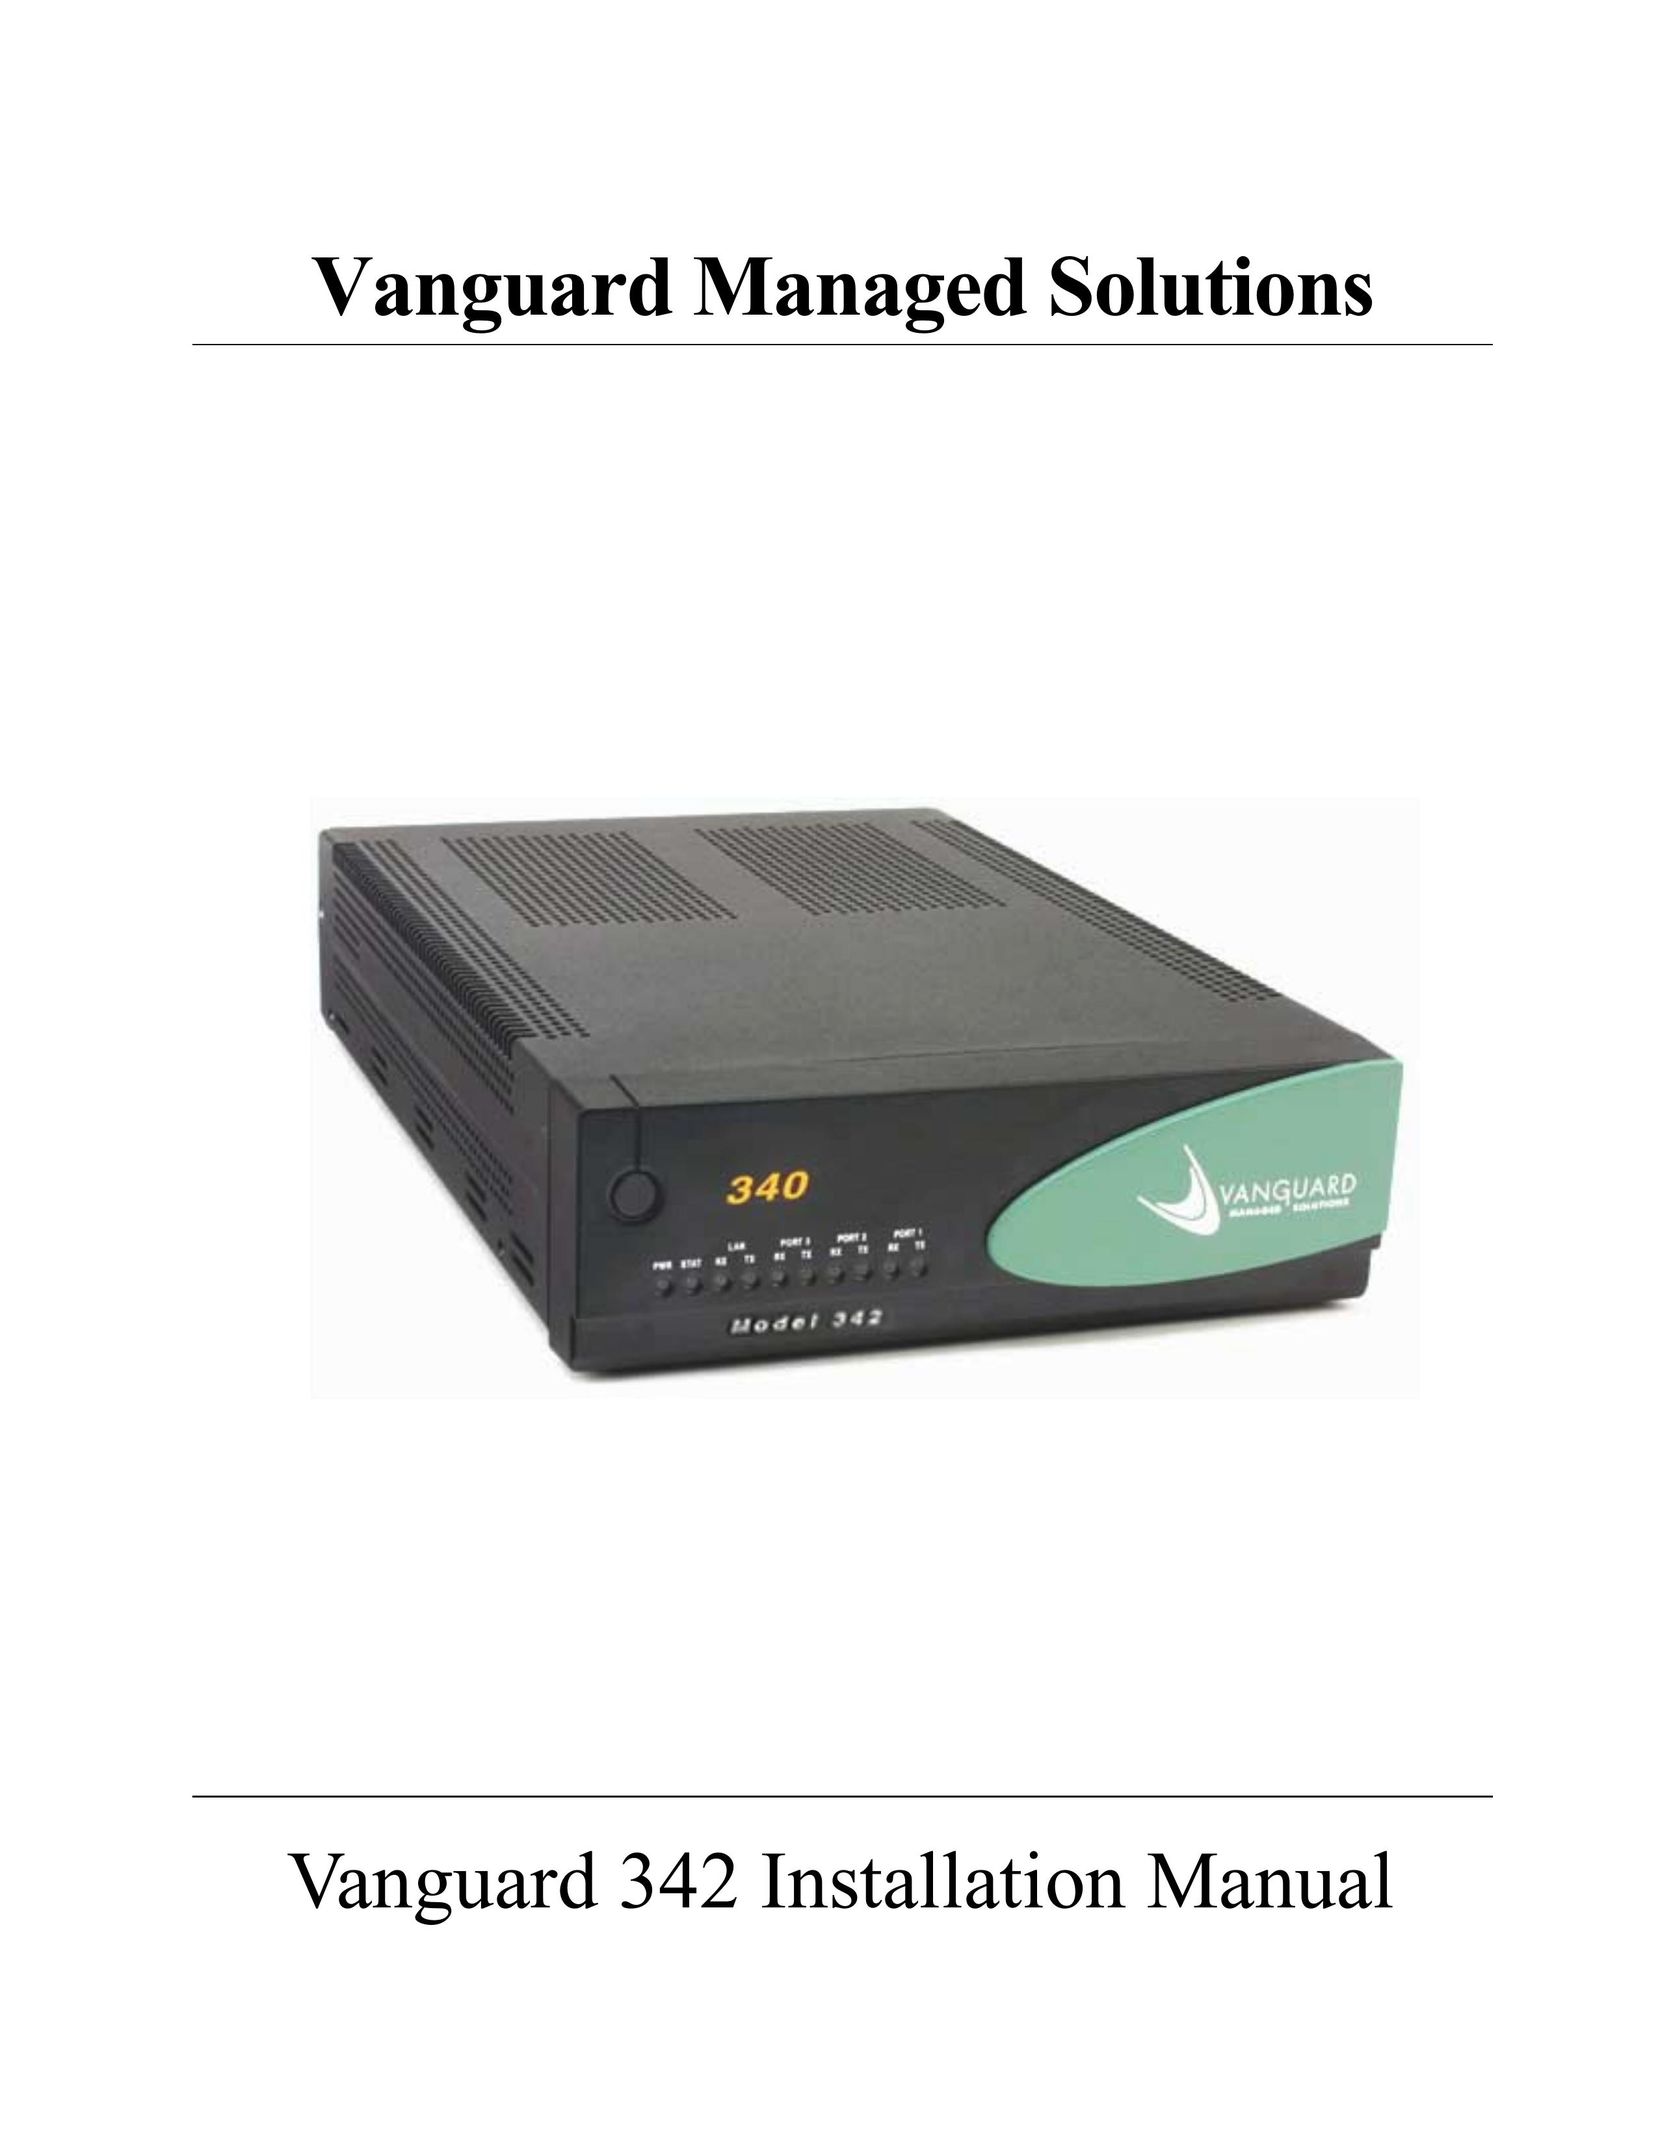 Vanguard Managed Solutions 342 Network Router User Manual